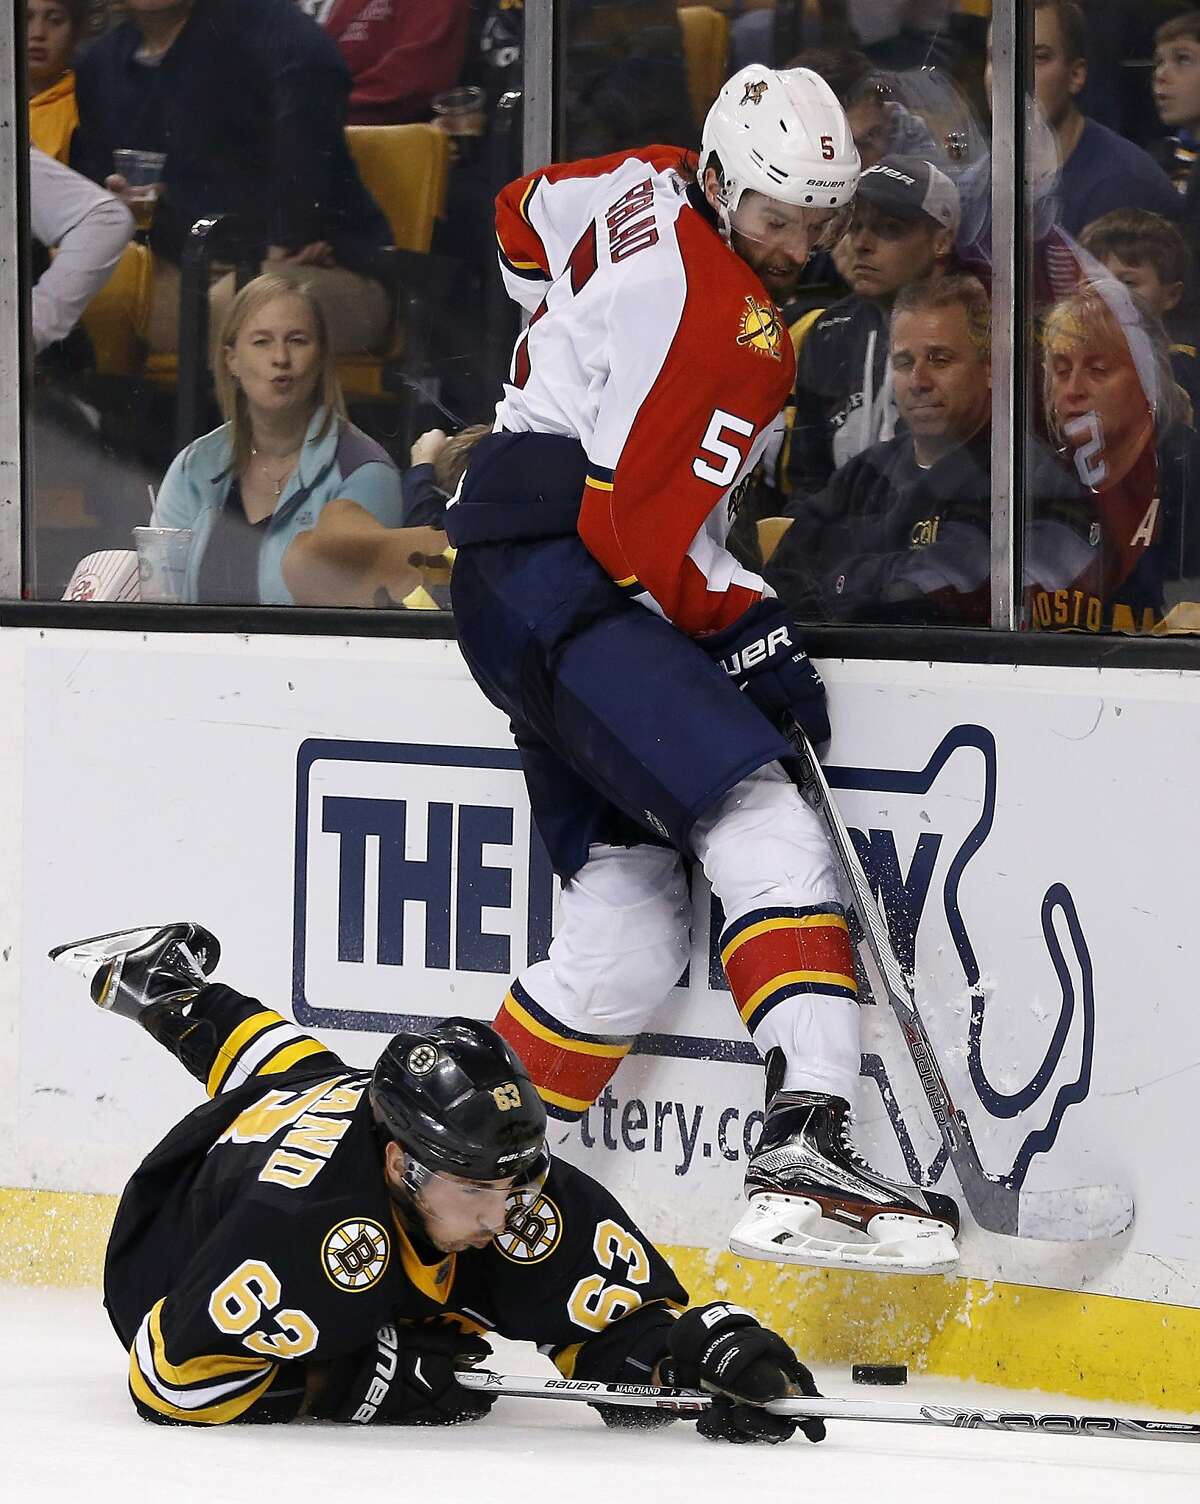 Florida Panthers' Aaron Ekblad (5) and Boston Bruins' Brad Marchand (63) battle for the puck during the second period of an NHL hockey game in Boston, Saturday, Dec. 12, 2015. The Bruins won 3-1. (AP Photo/Michael Dwyer)